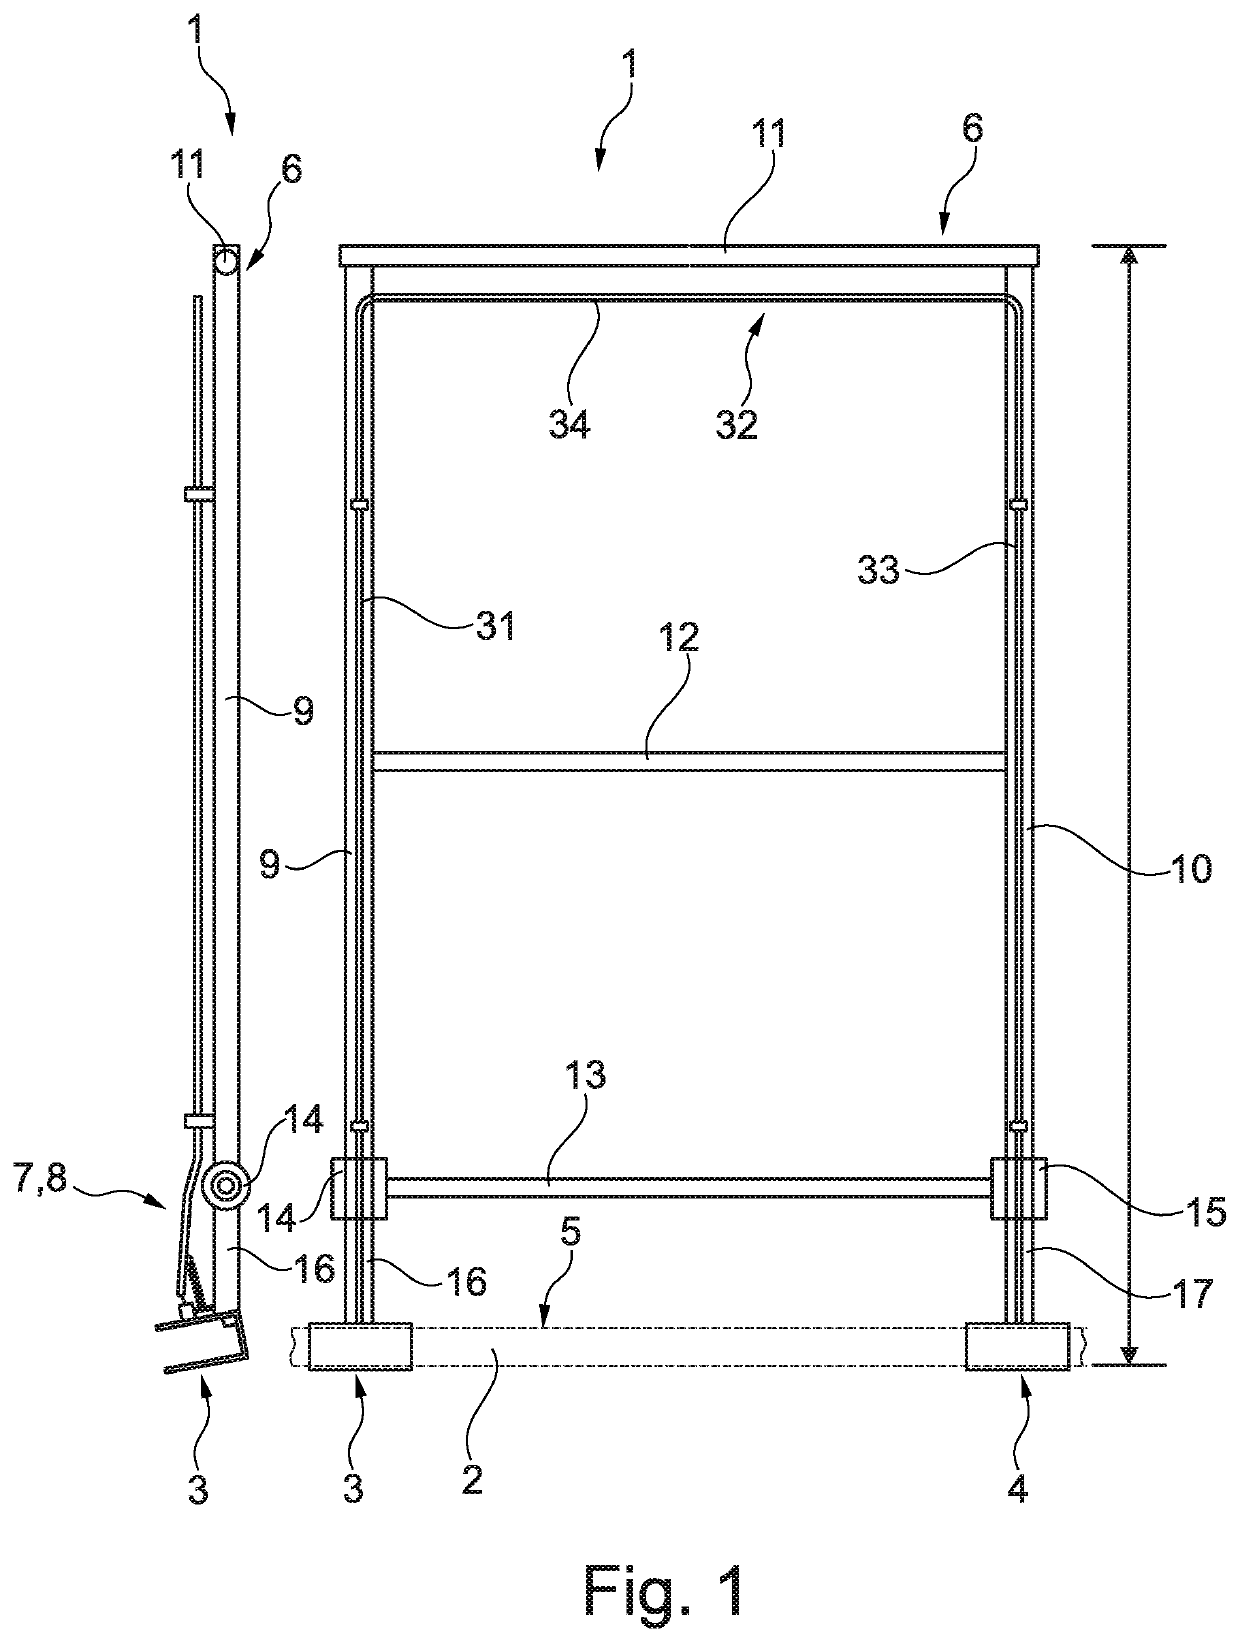 Device for Positionally Accurate Positioning of a Transport Pallet